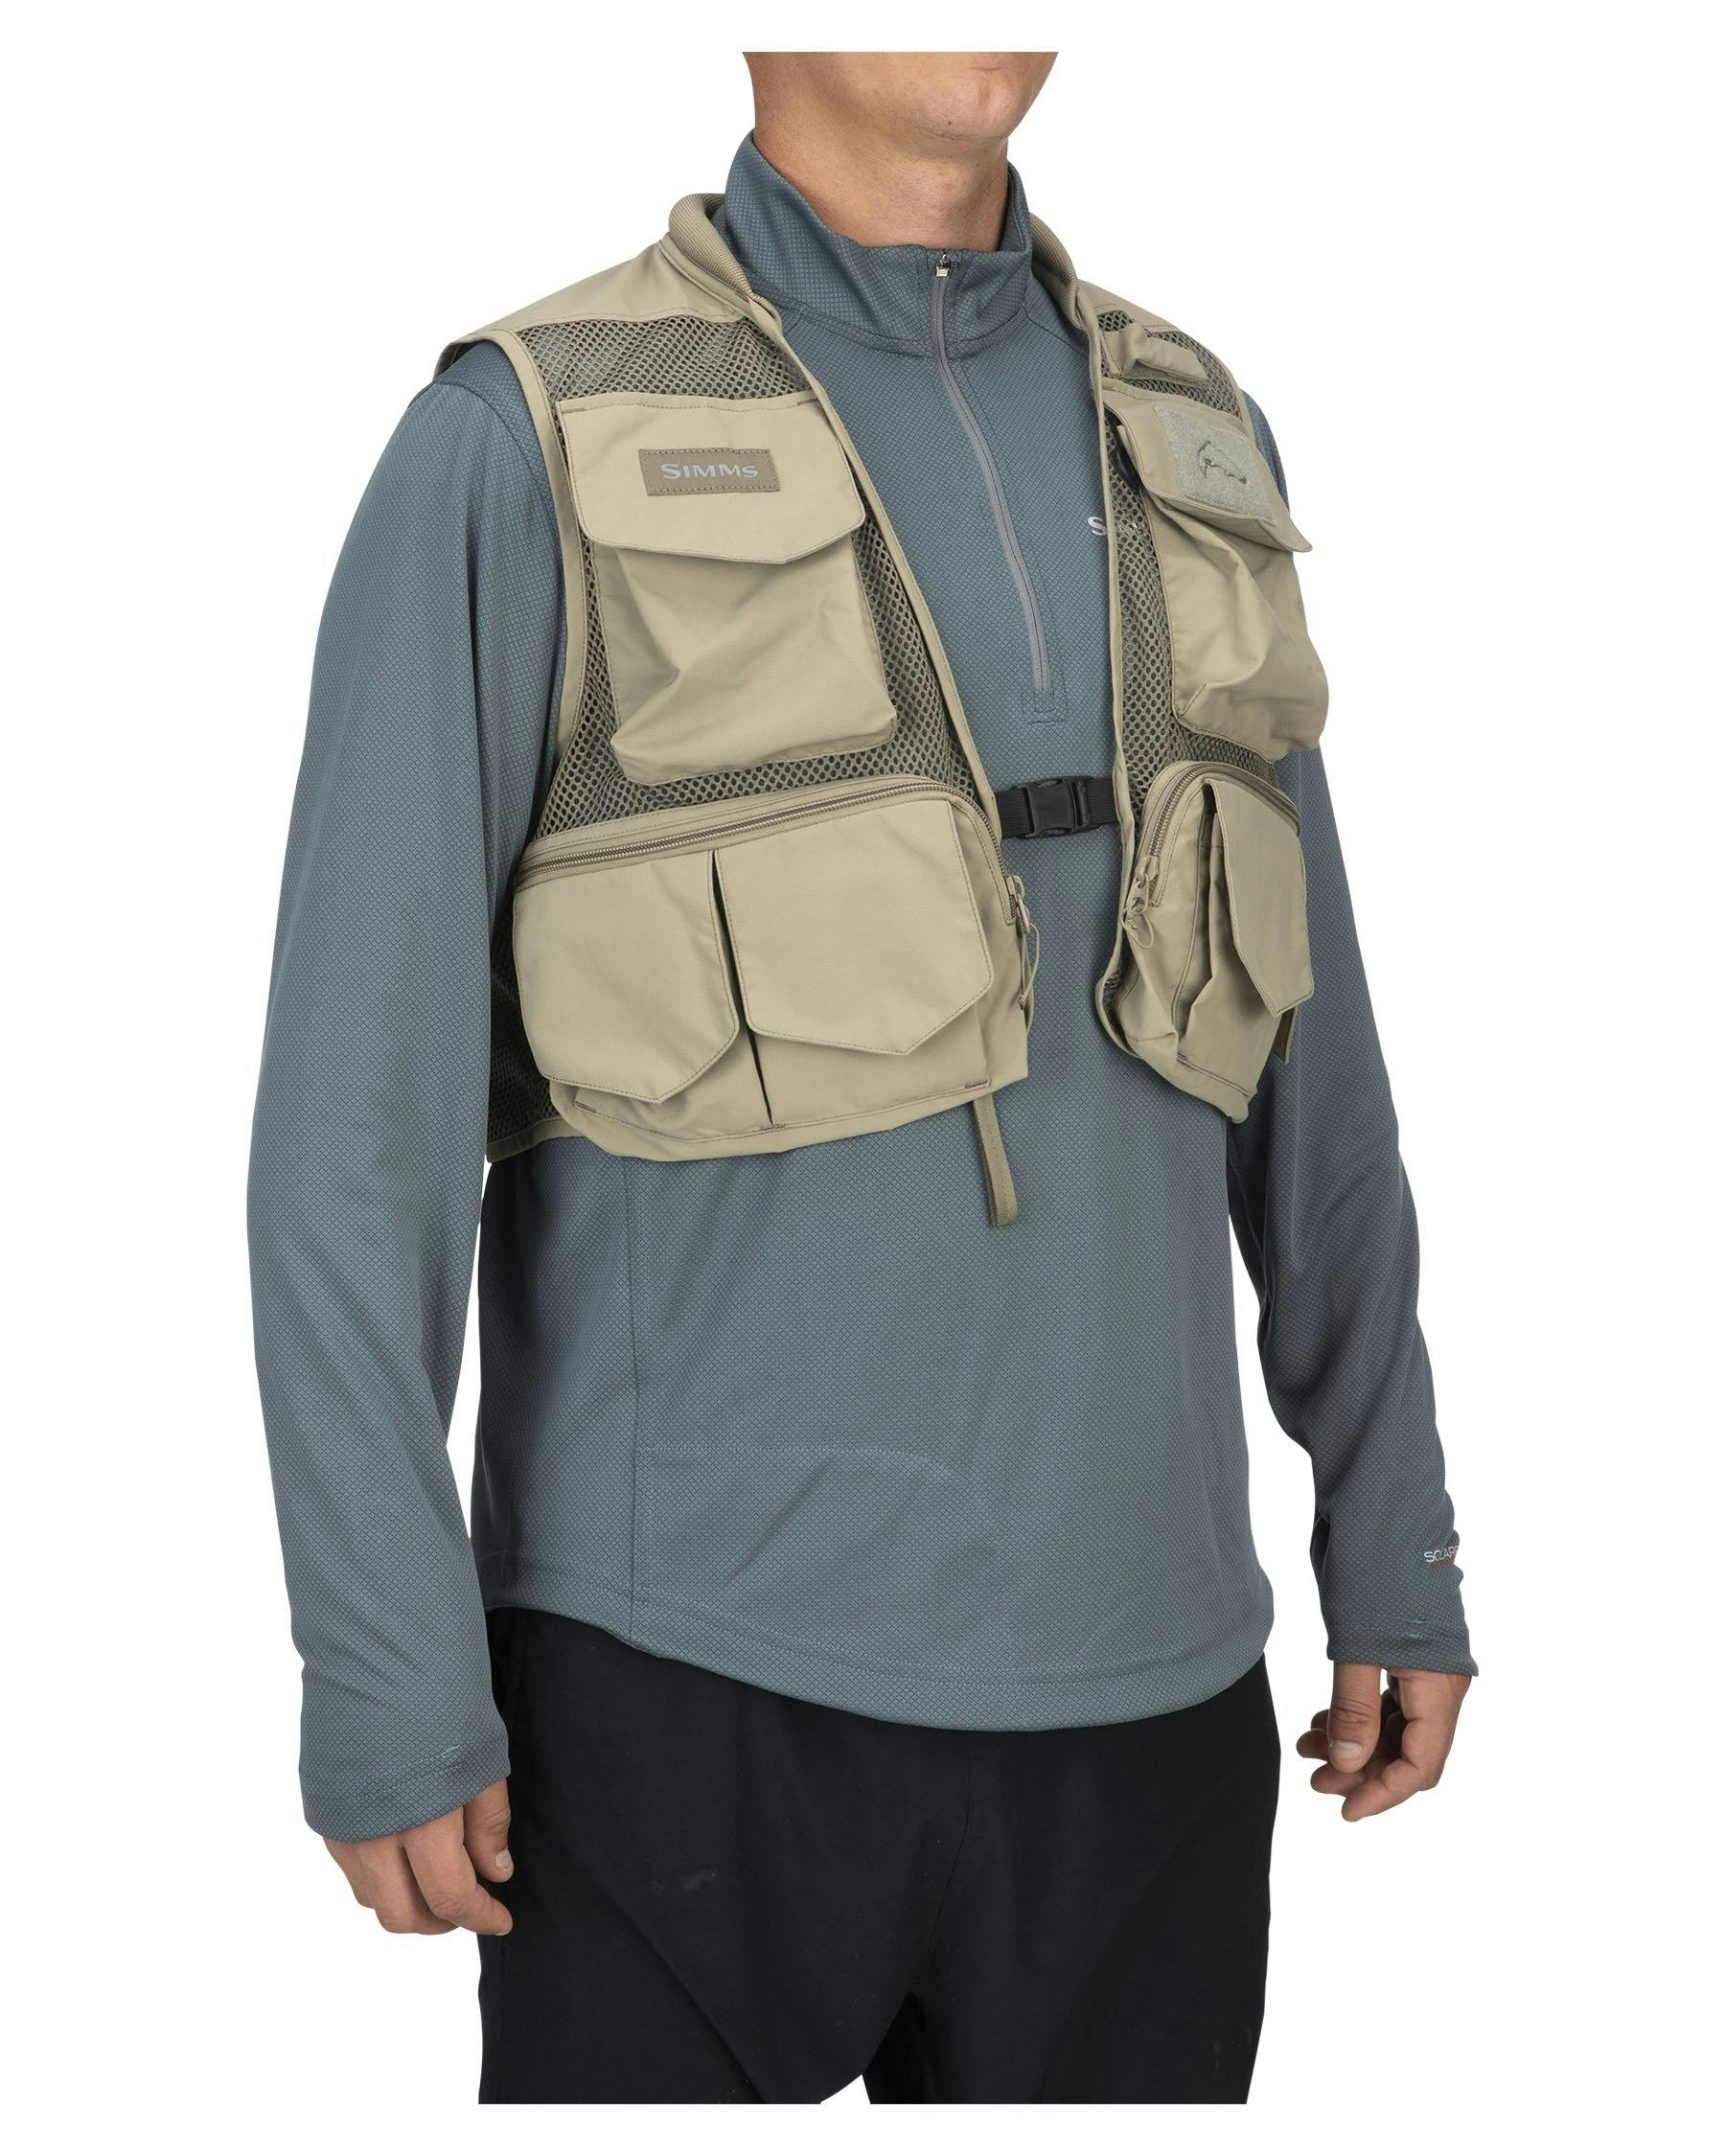 Simms Tributary Vest